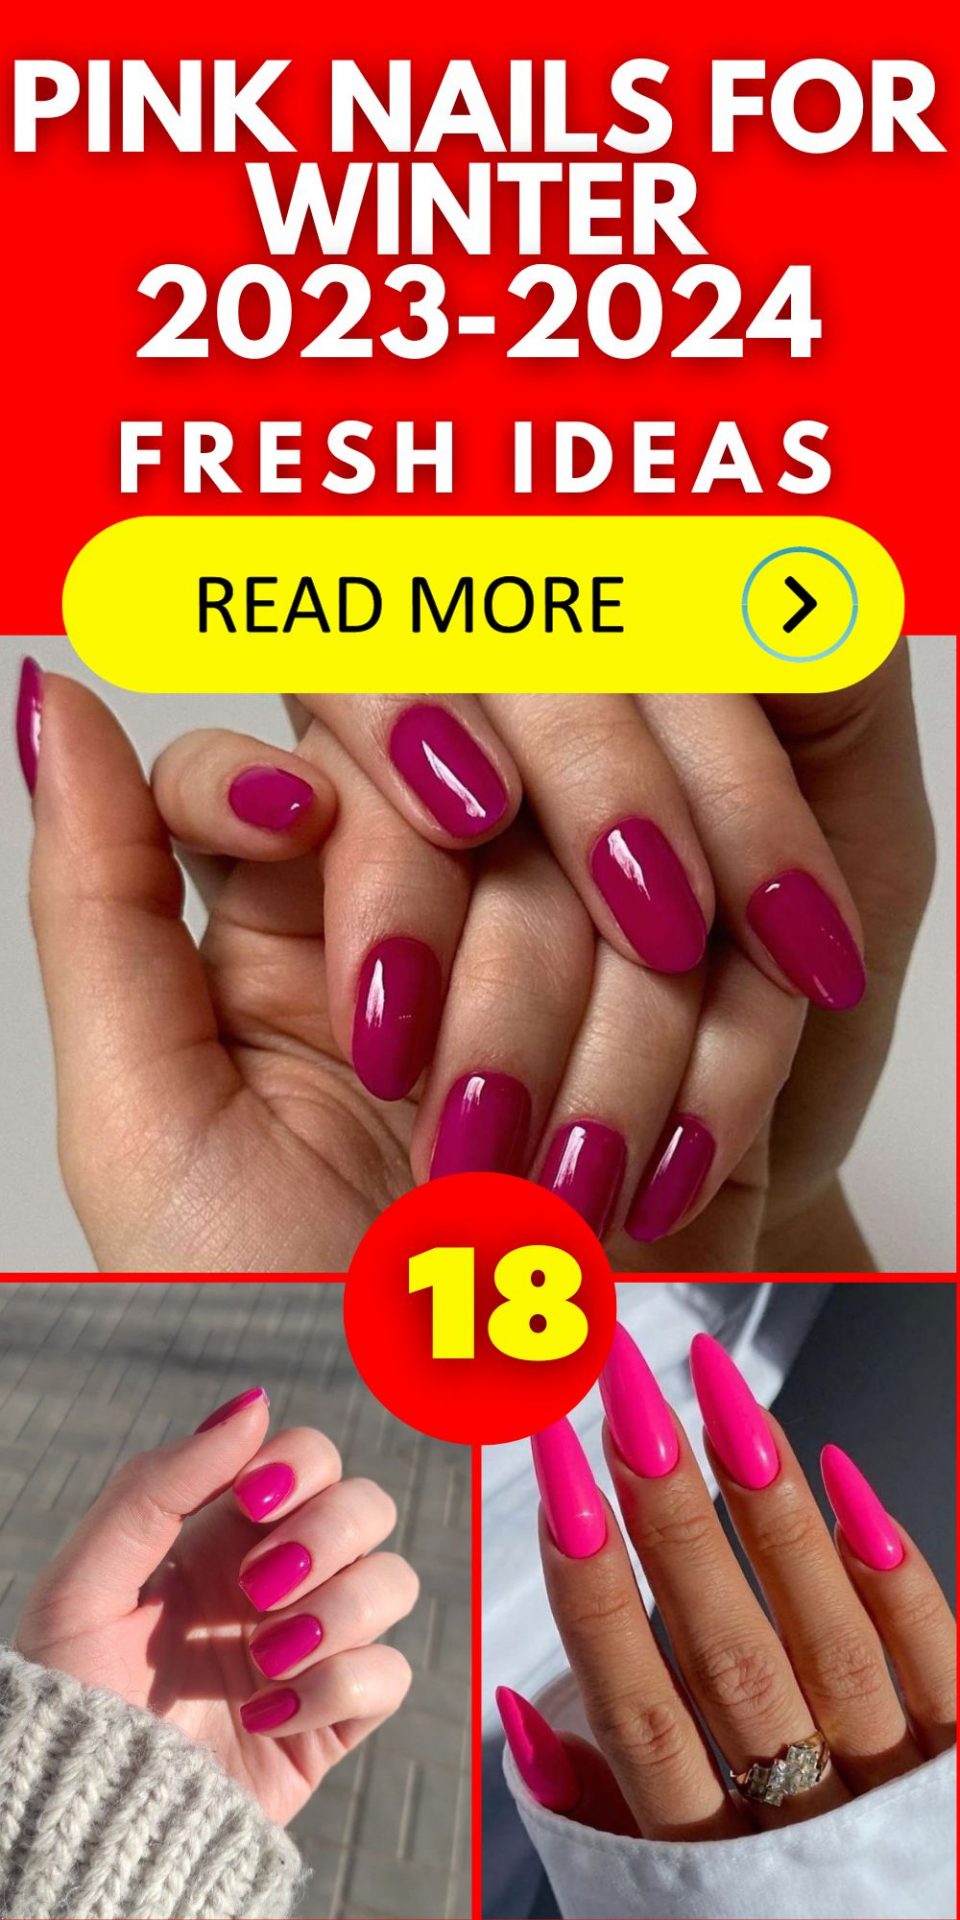 Pink Nails for Winter 2023-2024 18 Ideas - women-club.online